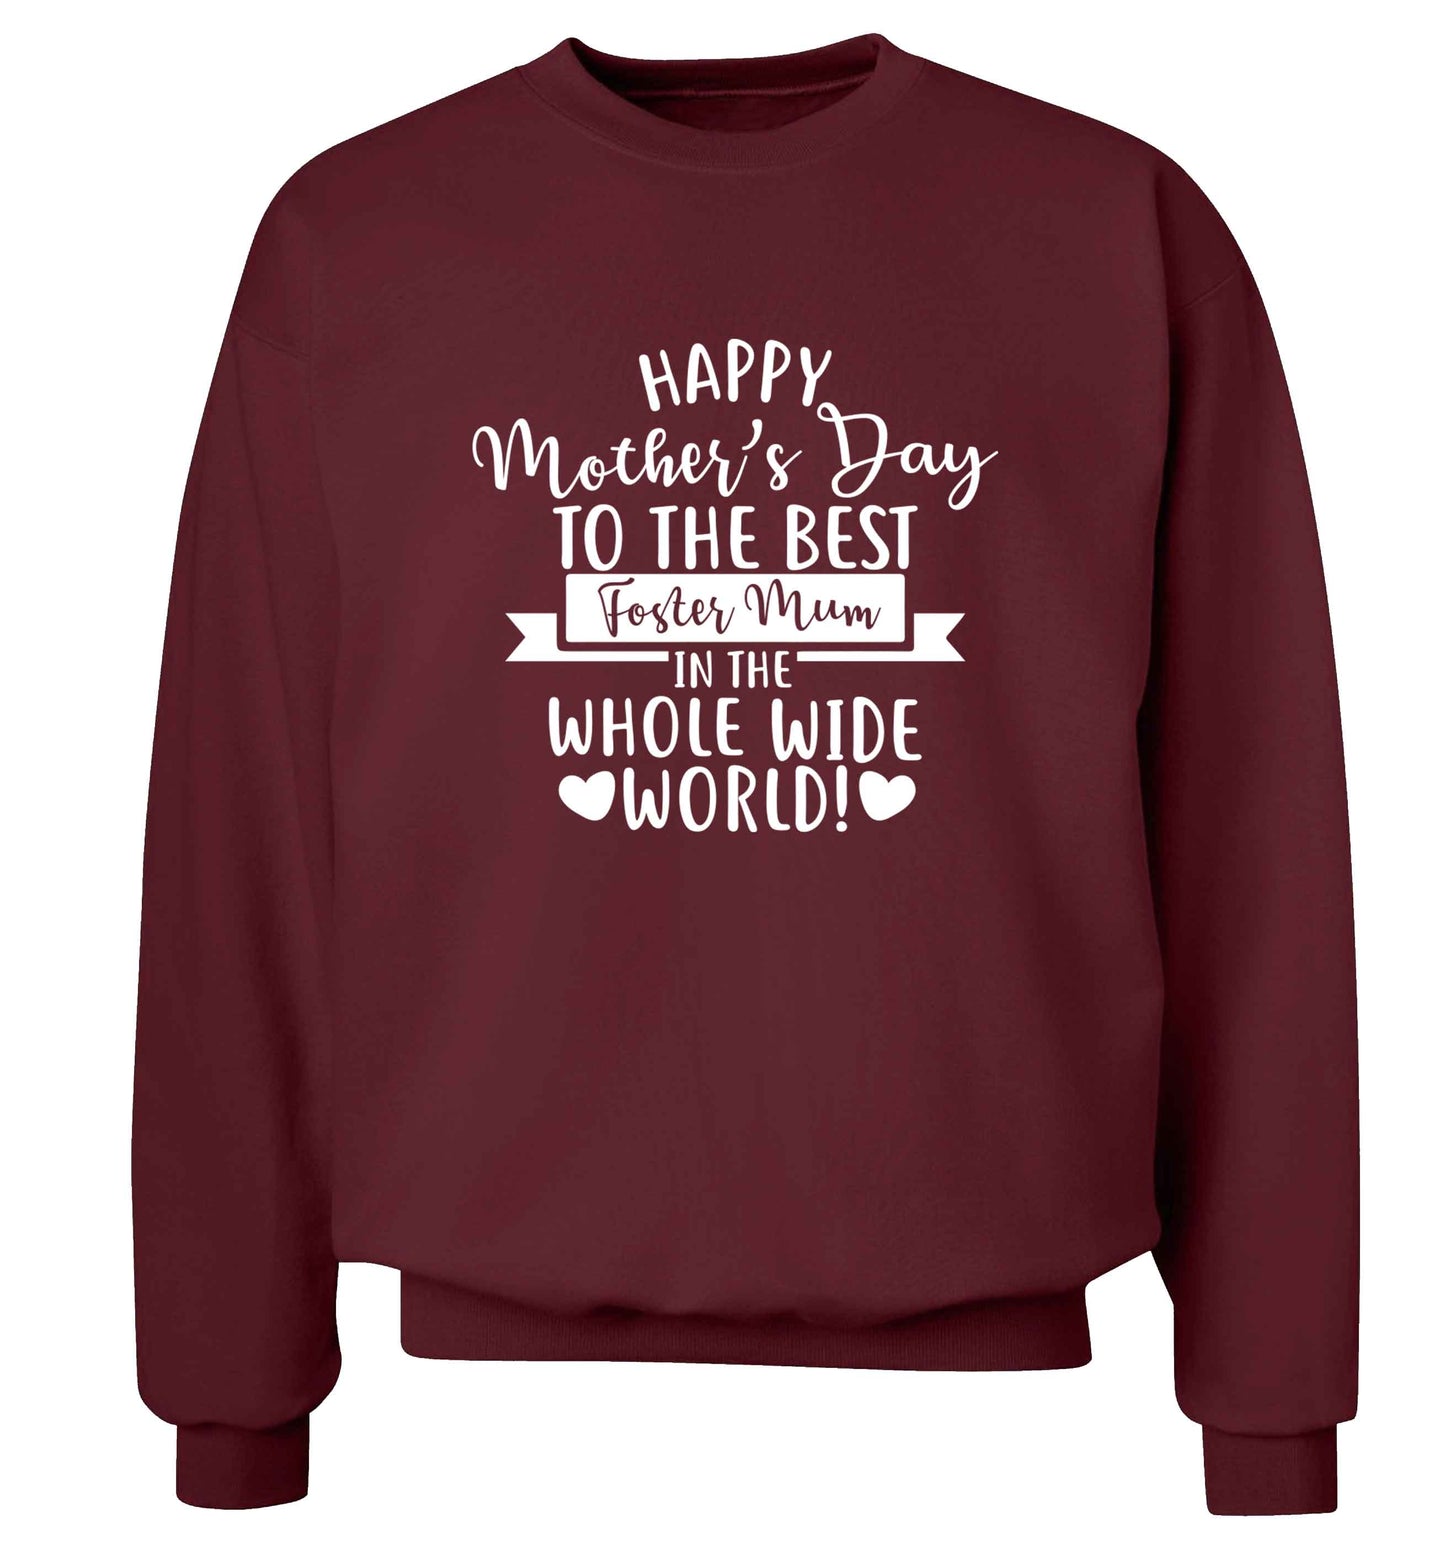 Happy mother's day to the best foster mum in the world adult's unisex maroon sweater 2XL